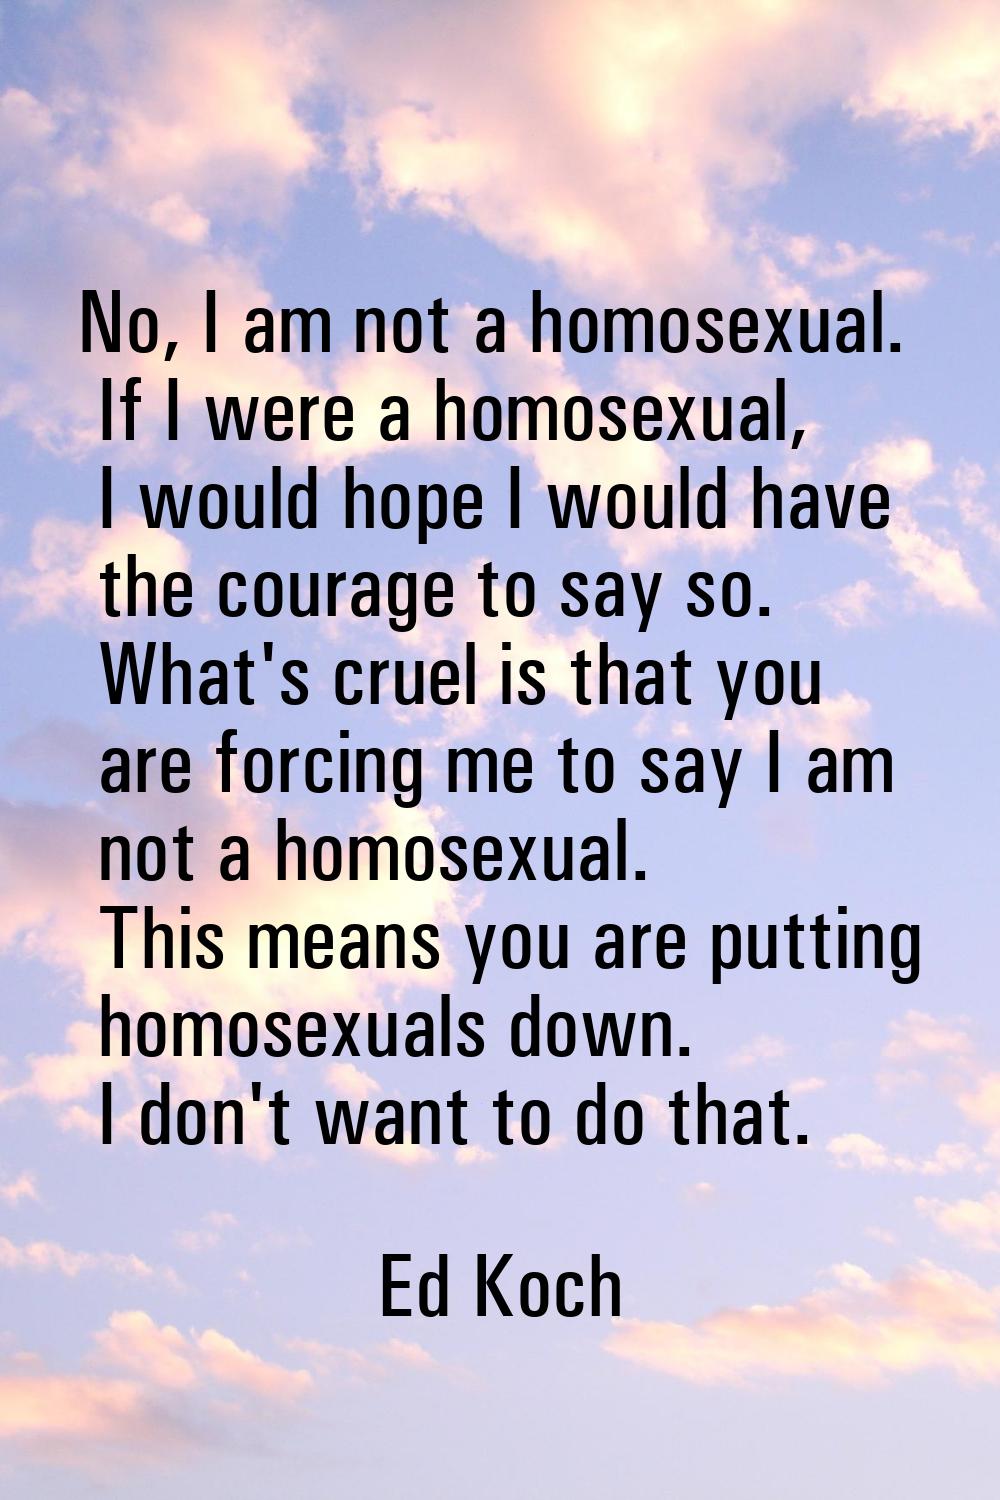 No, I am not a homosexual. If I were a homosexual, I would hope I would have the courage to say so.